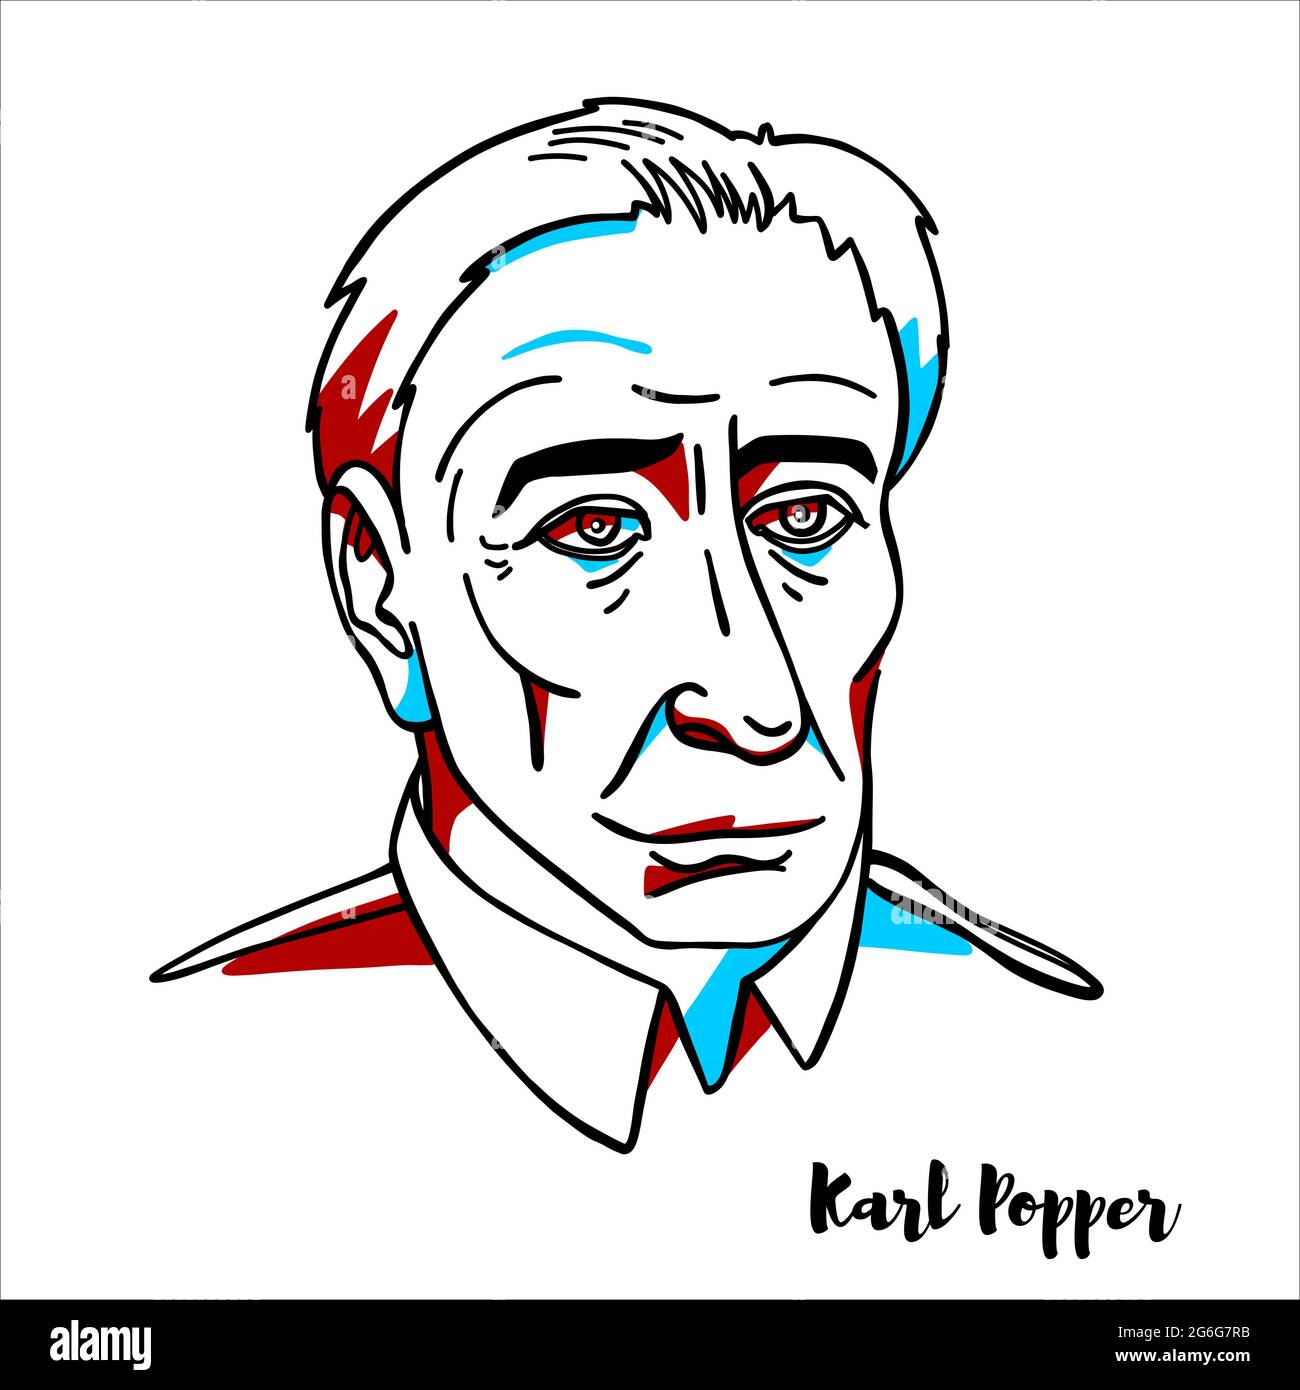 RUSSIA, MOSCOW - March, 21, 2019: Karl Popper engraved vector portrait with ink contours. Austrian-British philosopher and professor. Stock Vector